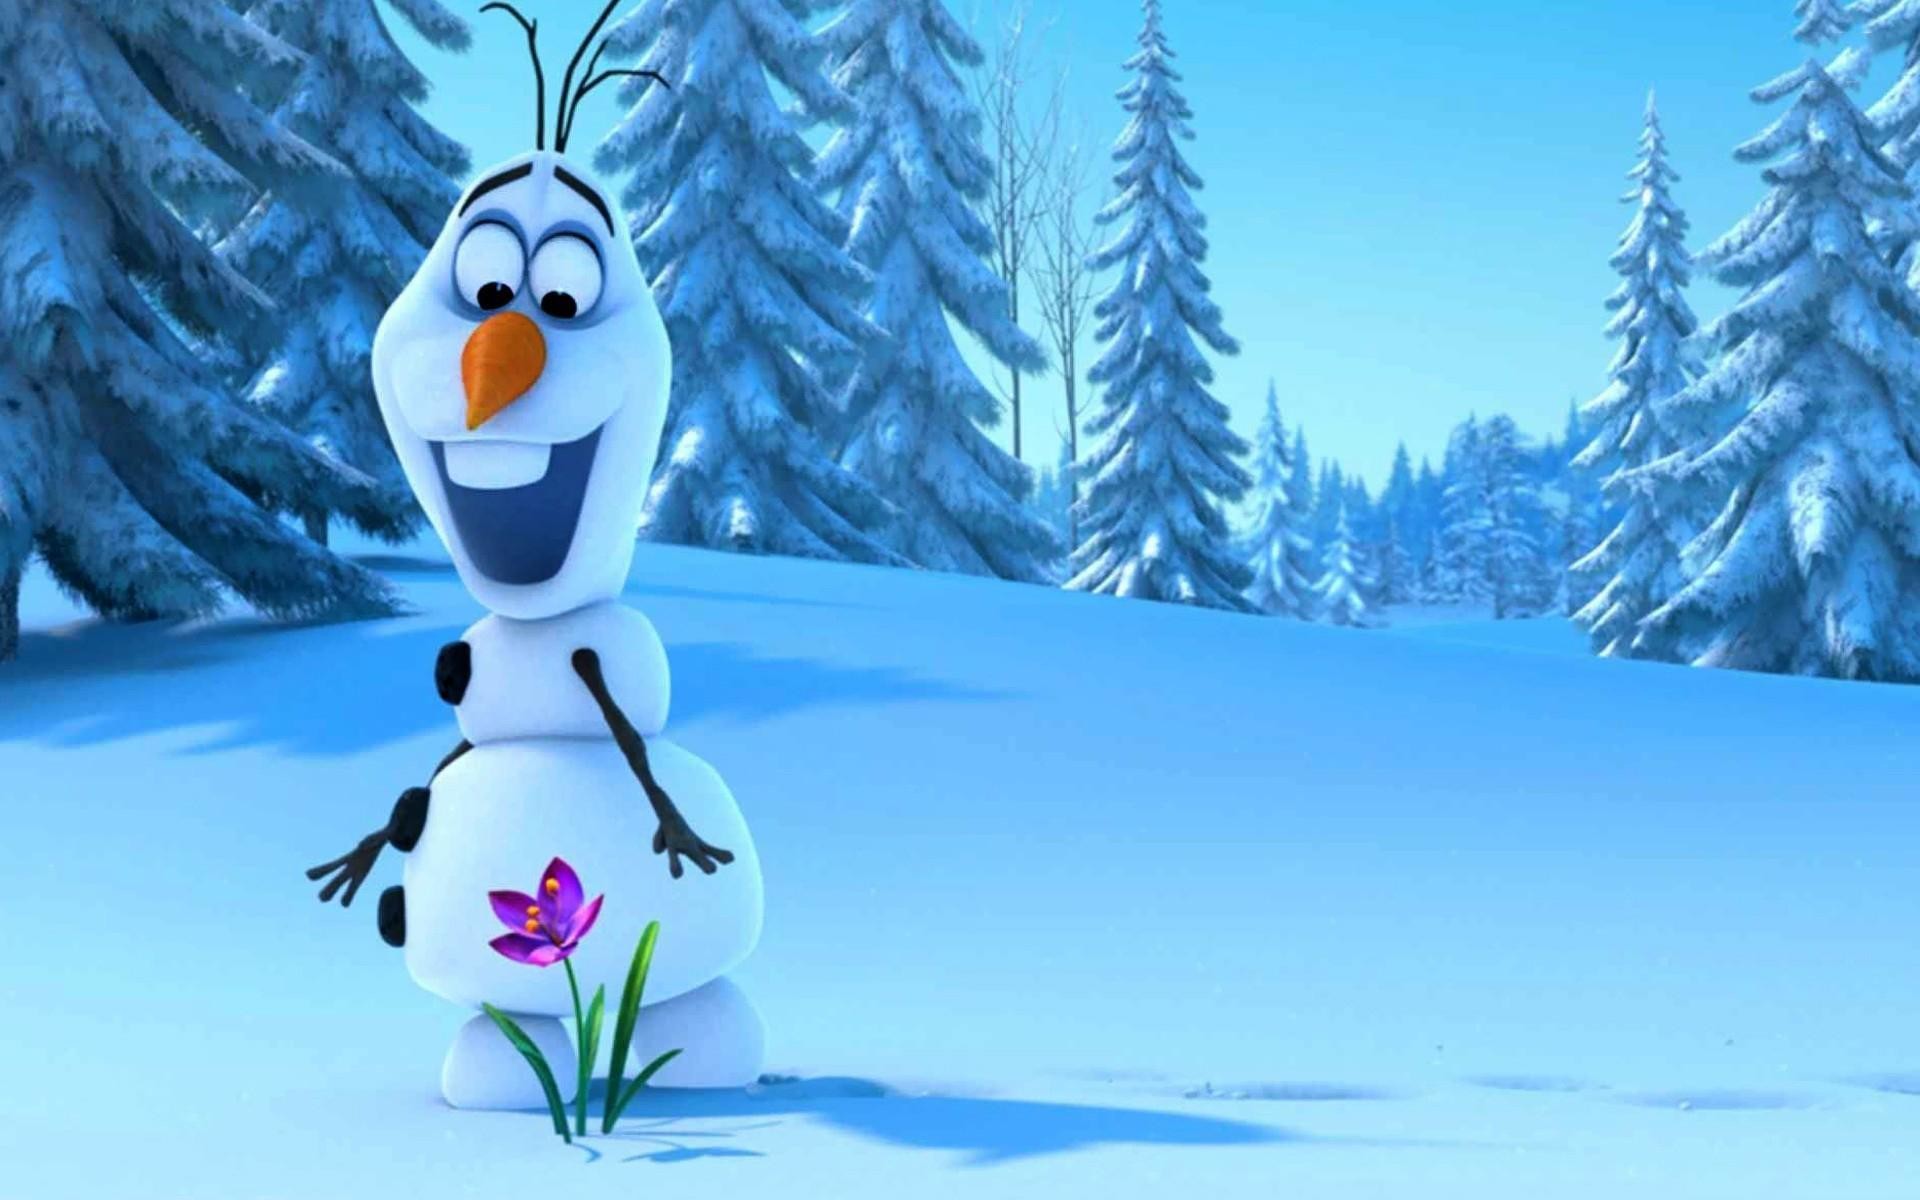 1920x1200 Search Results for “olaf snowman wallpaper” – Adorable Wallpapers